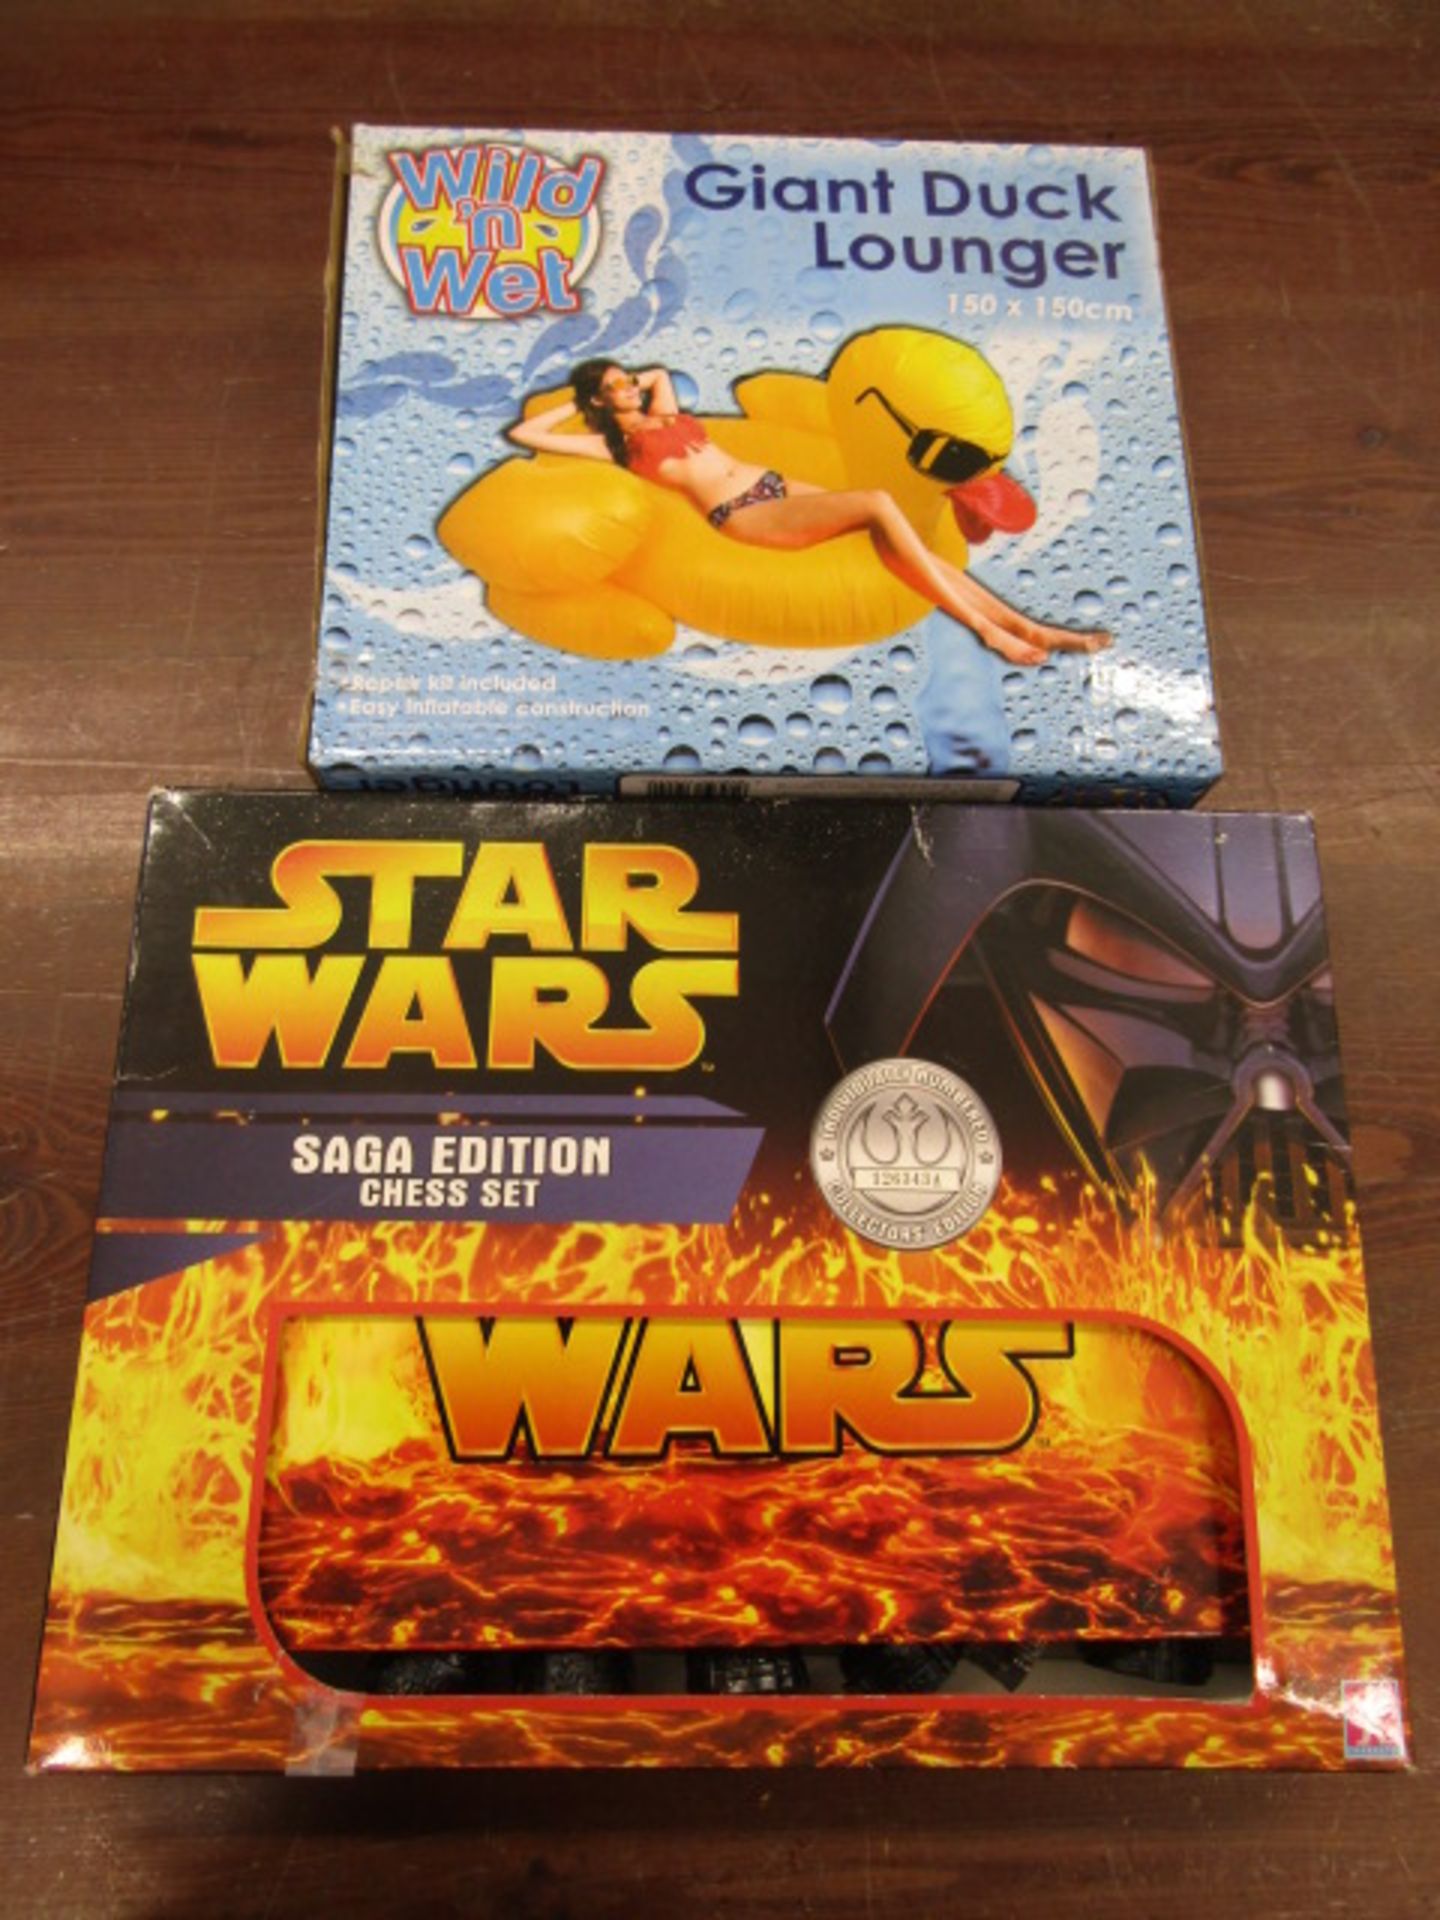 Star Wars chess set and a boxed duck lounger